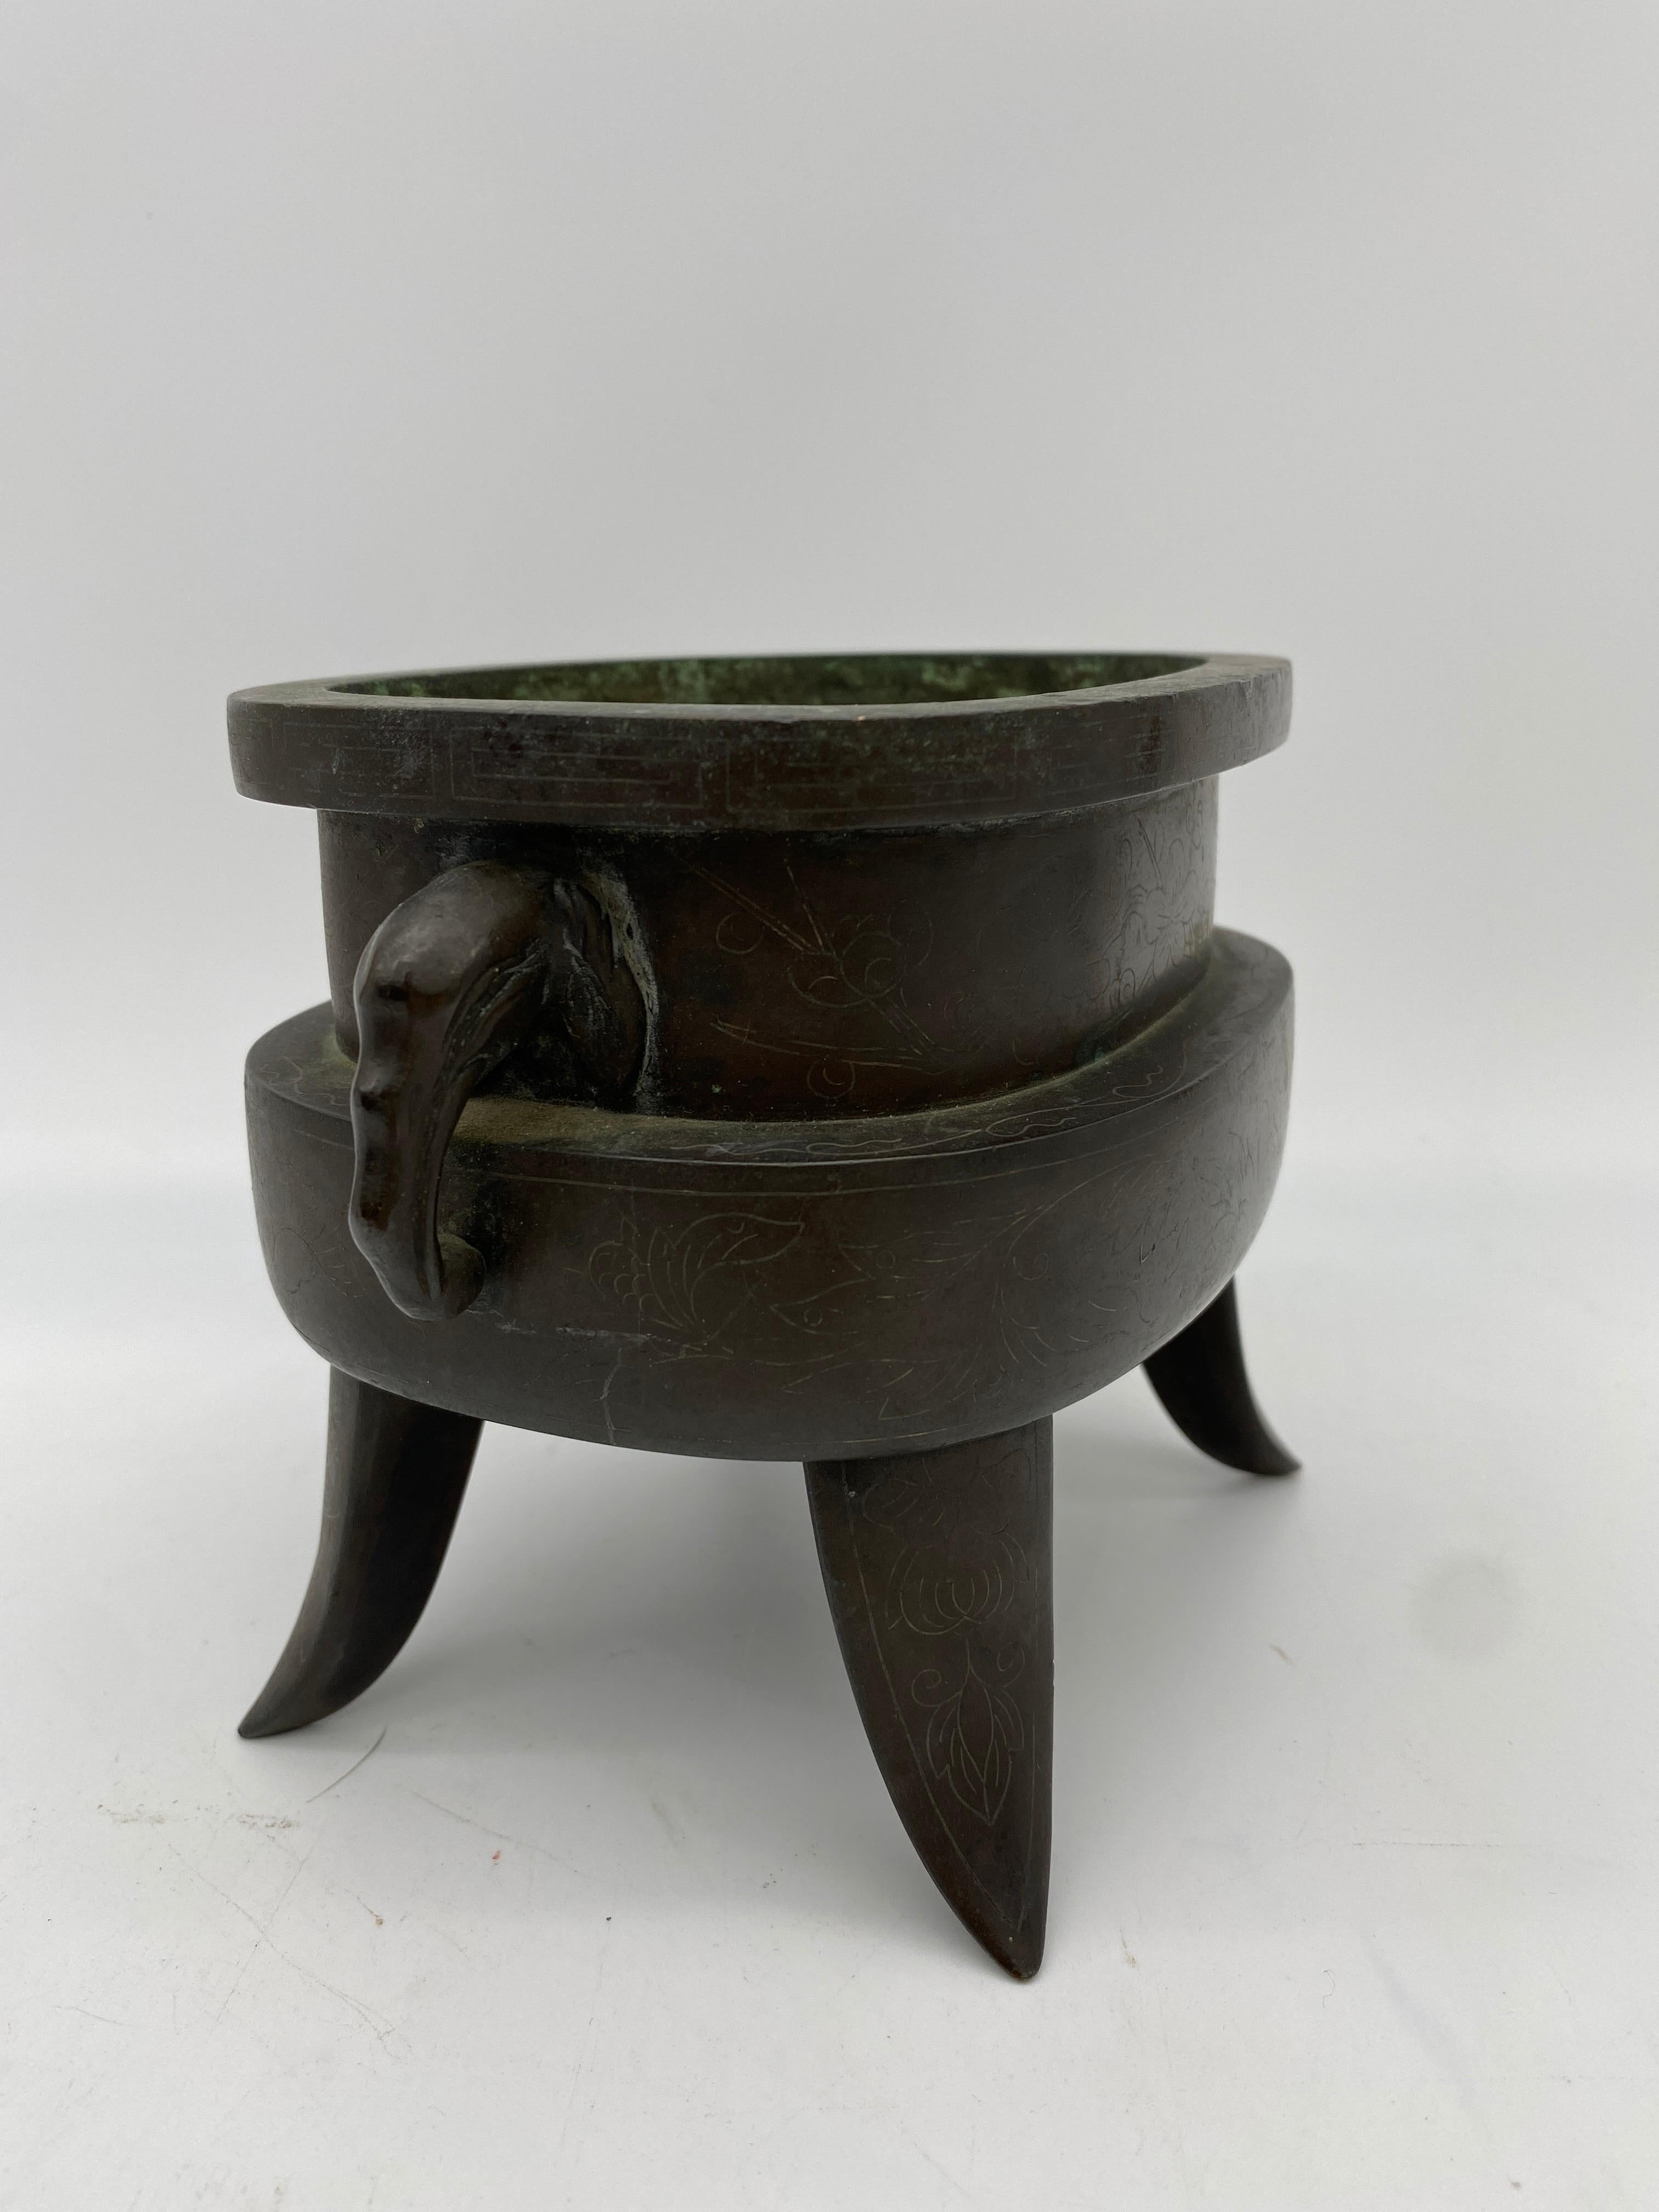 Antique Qing Dynasty Chinese Twin Handled Bronze Censer with Elephants Handles In Good Condition For Sale In Brea, CA